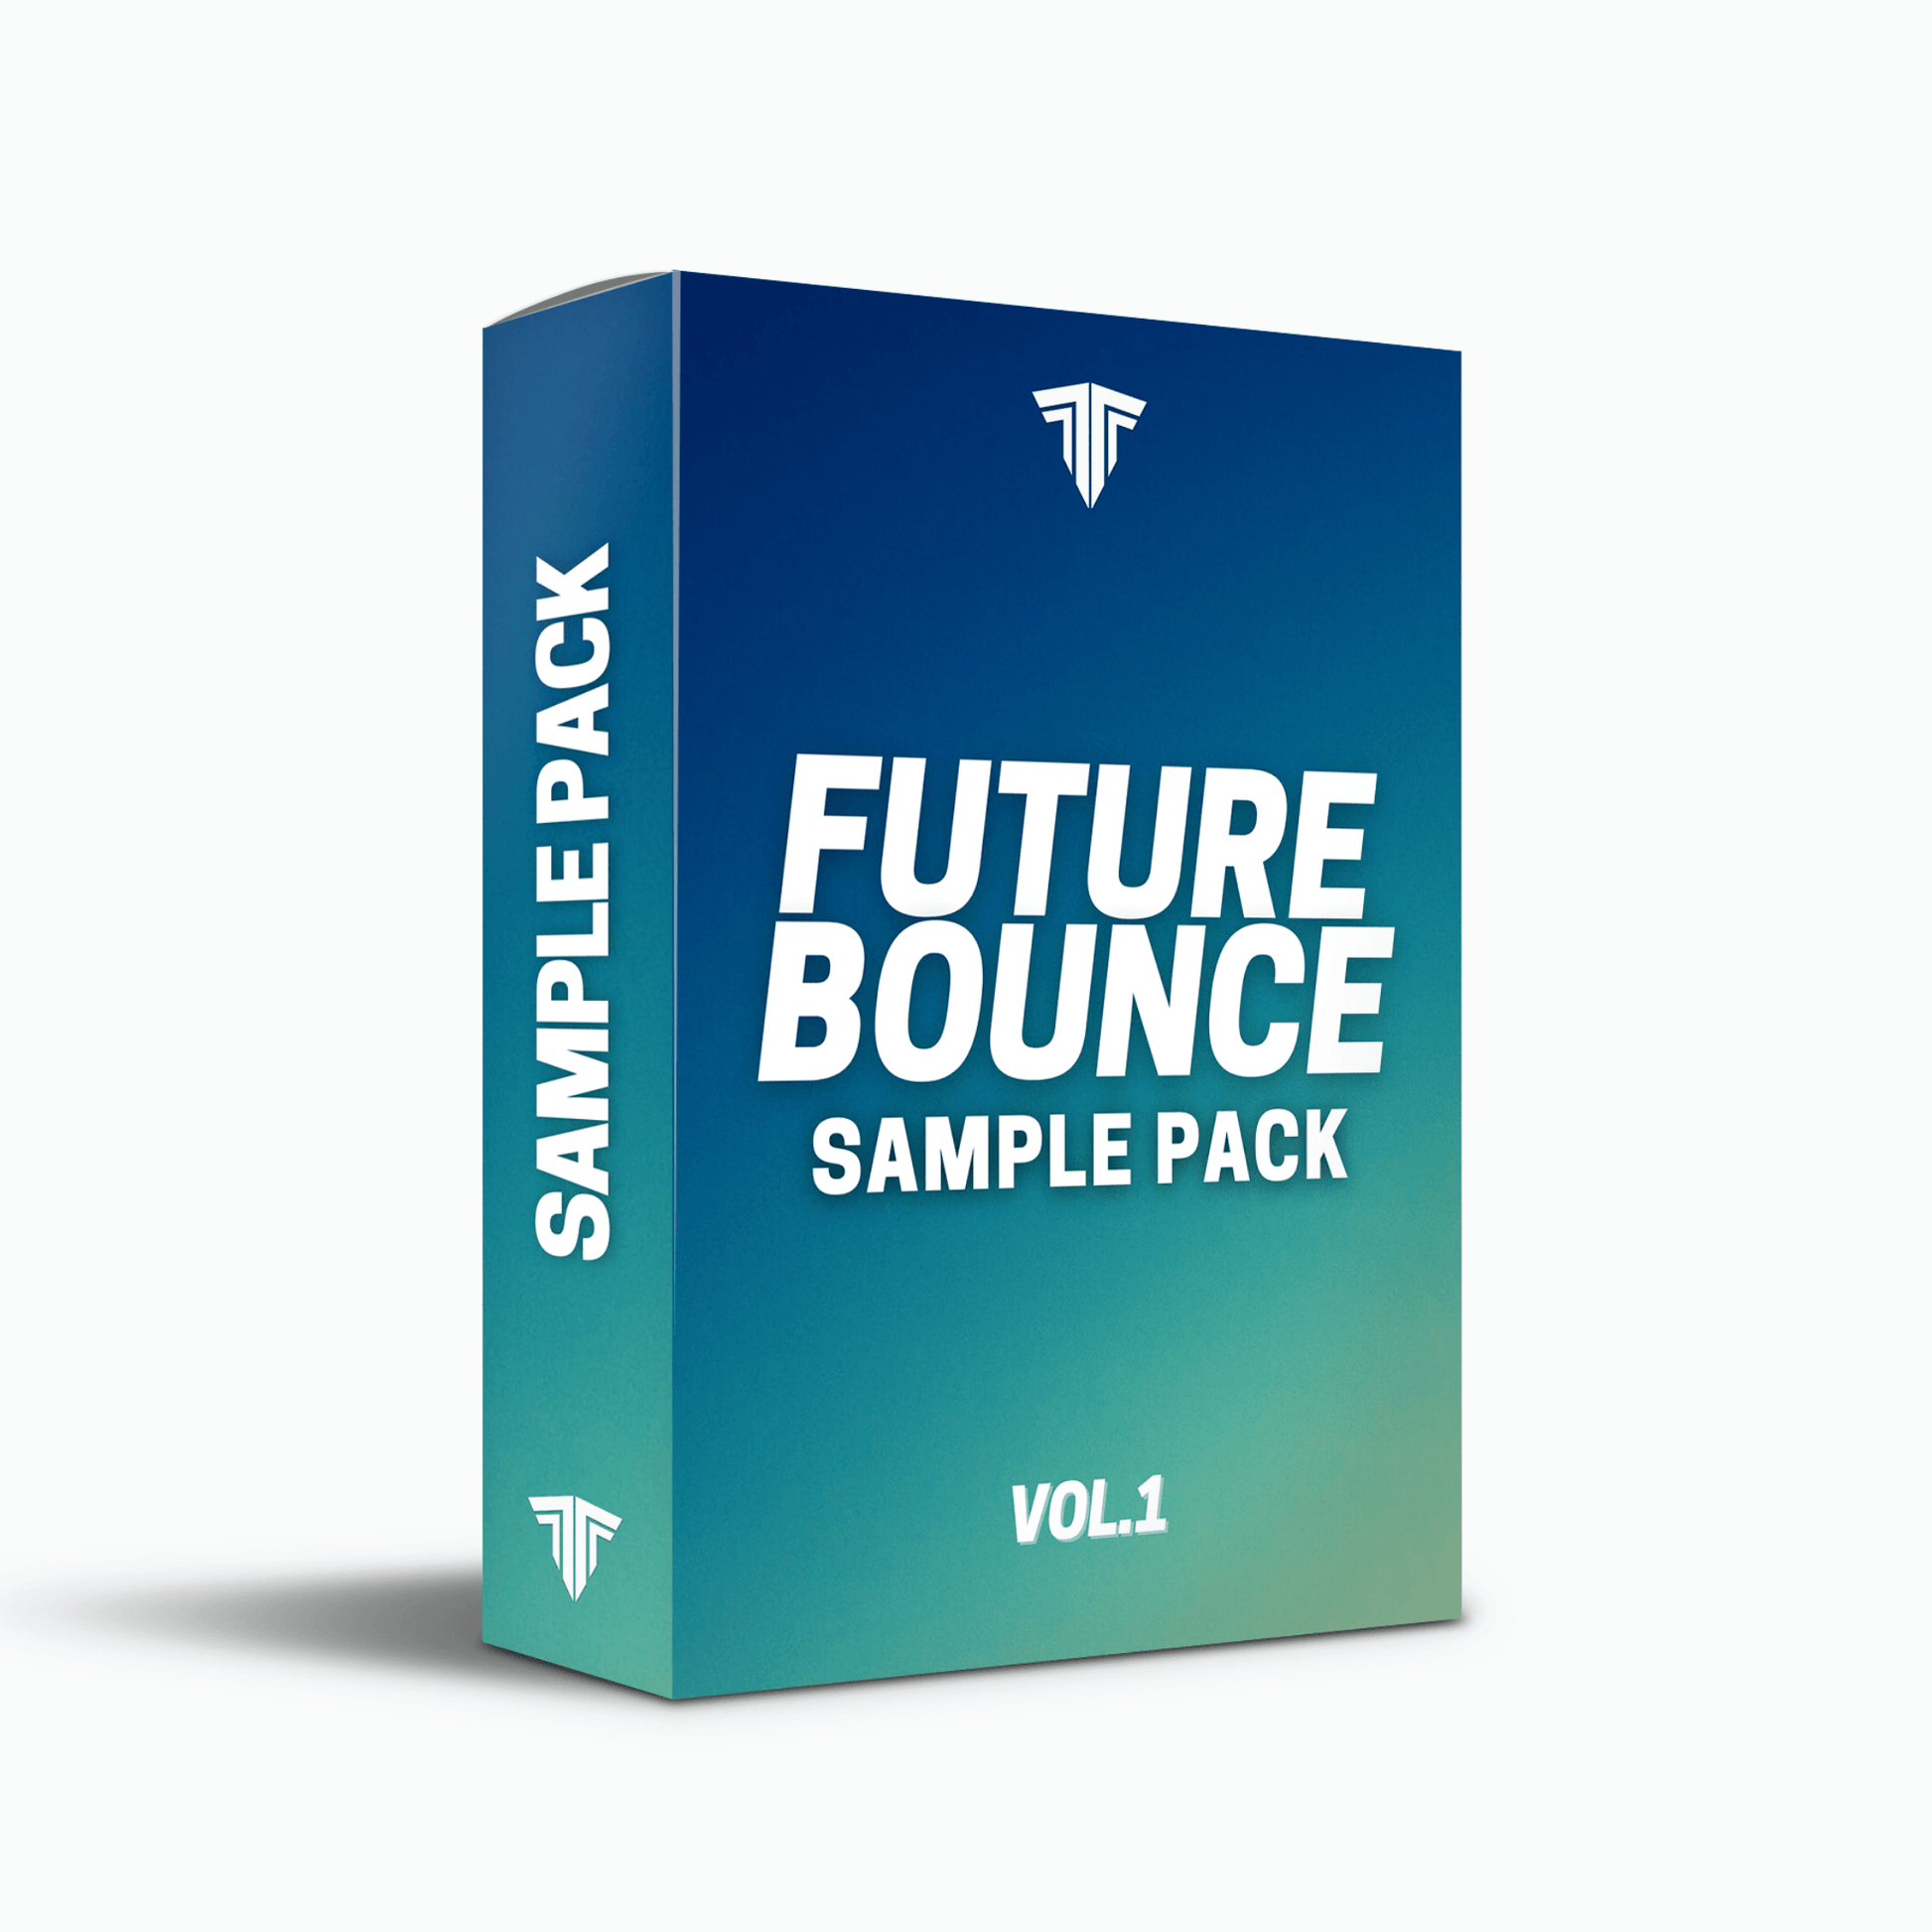 Future Bounce Sample Pack Vol.1 - Tracks To The Max